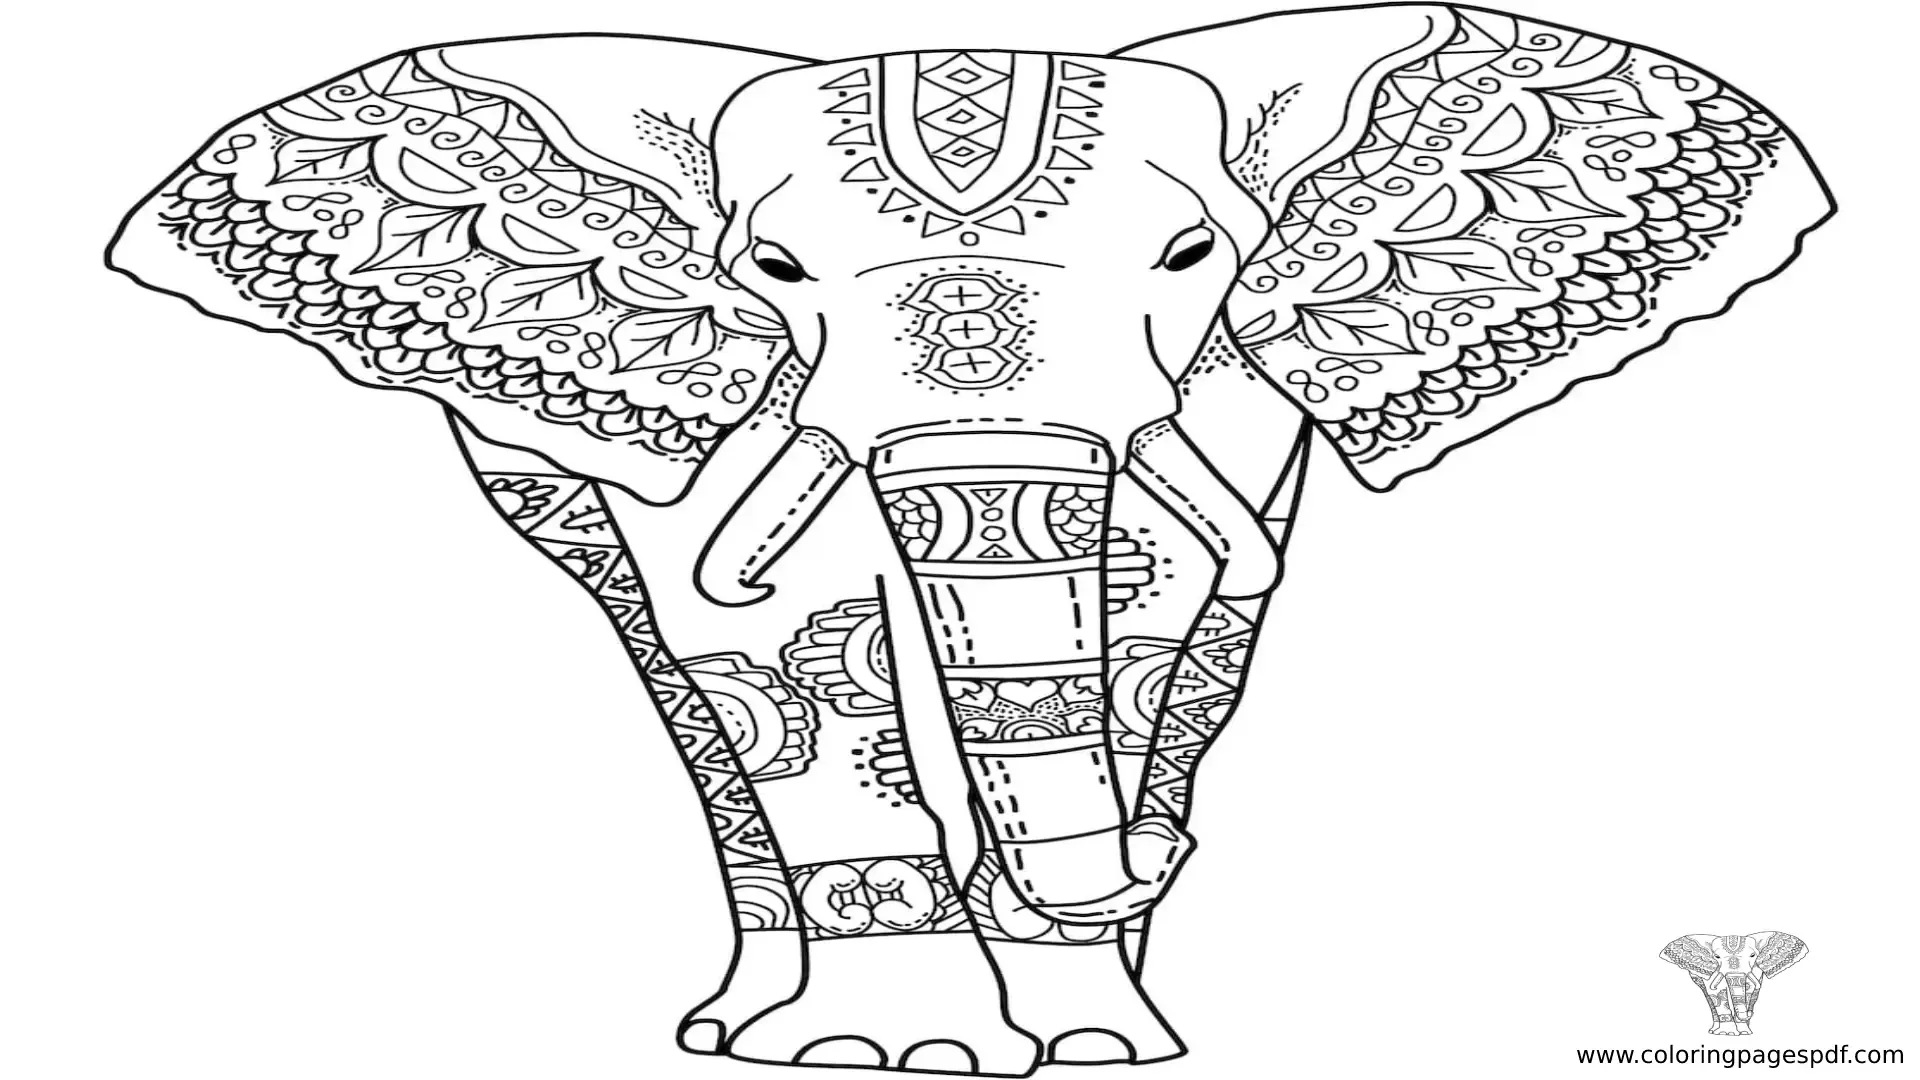 Coloring Pages Of An Elephant With Arab Designs Mandala